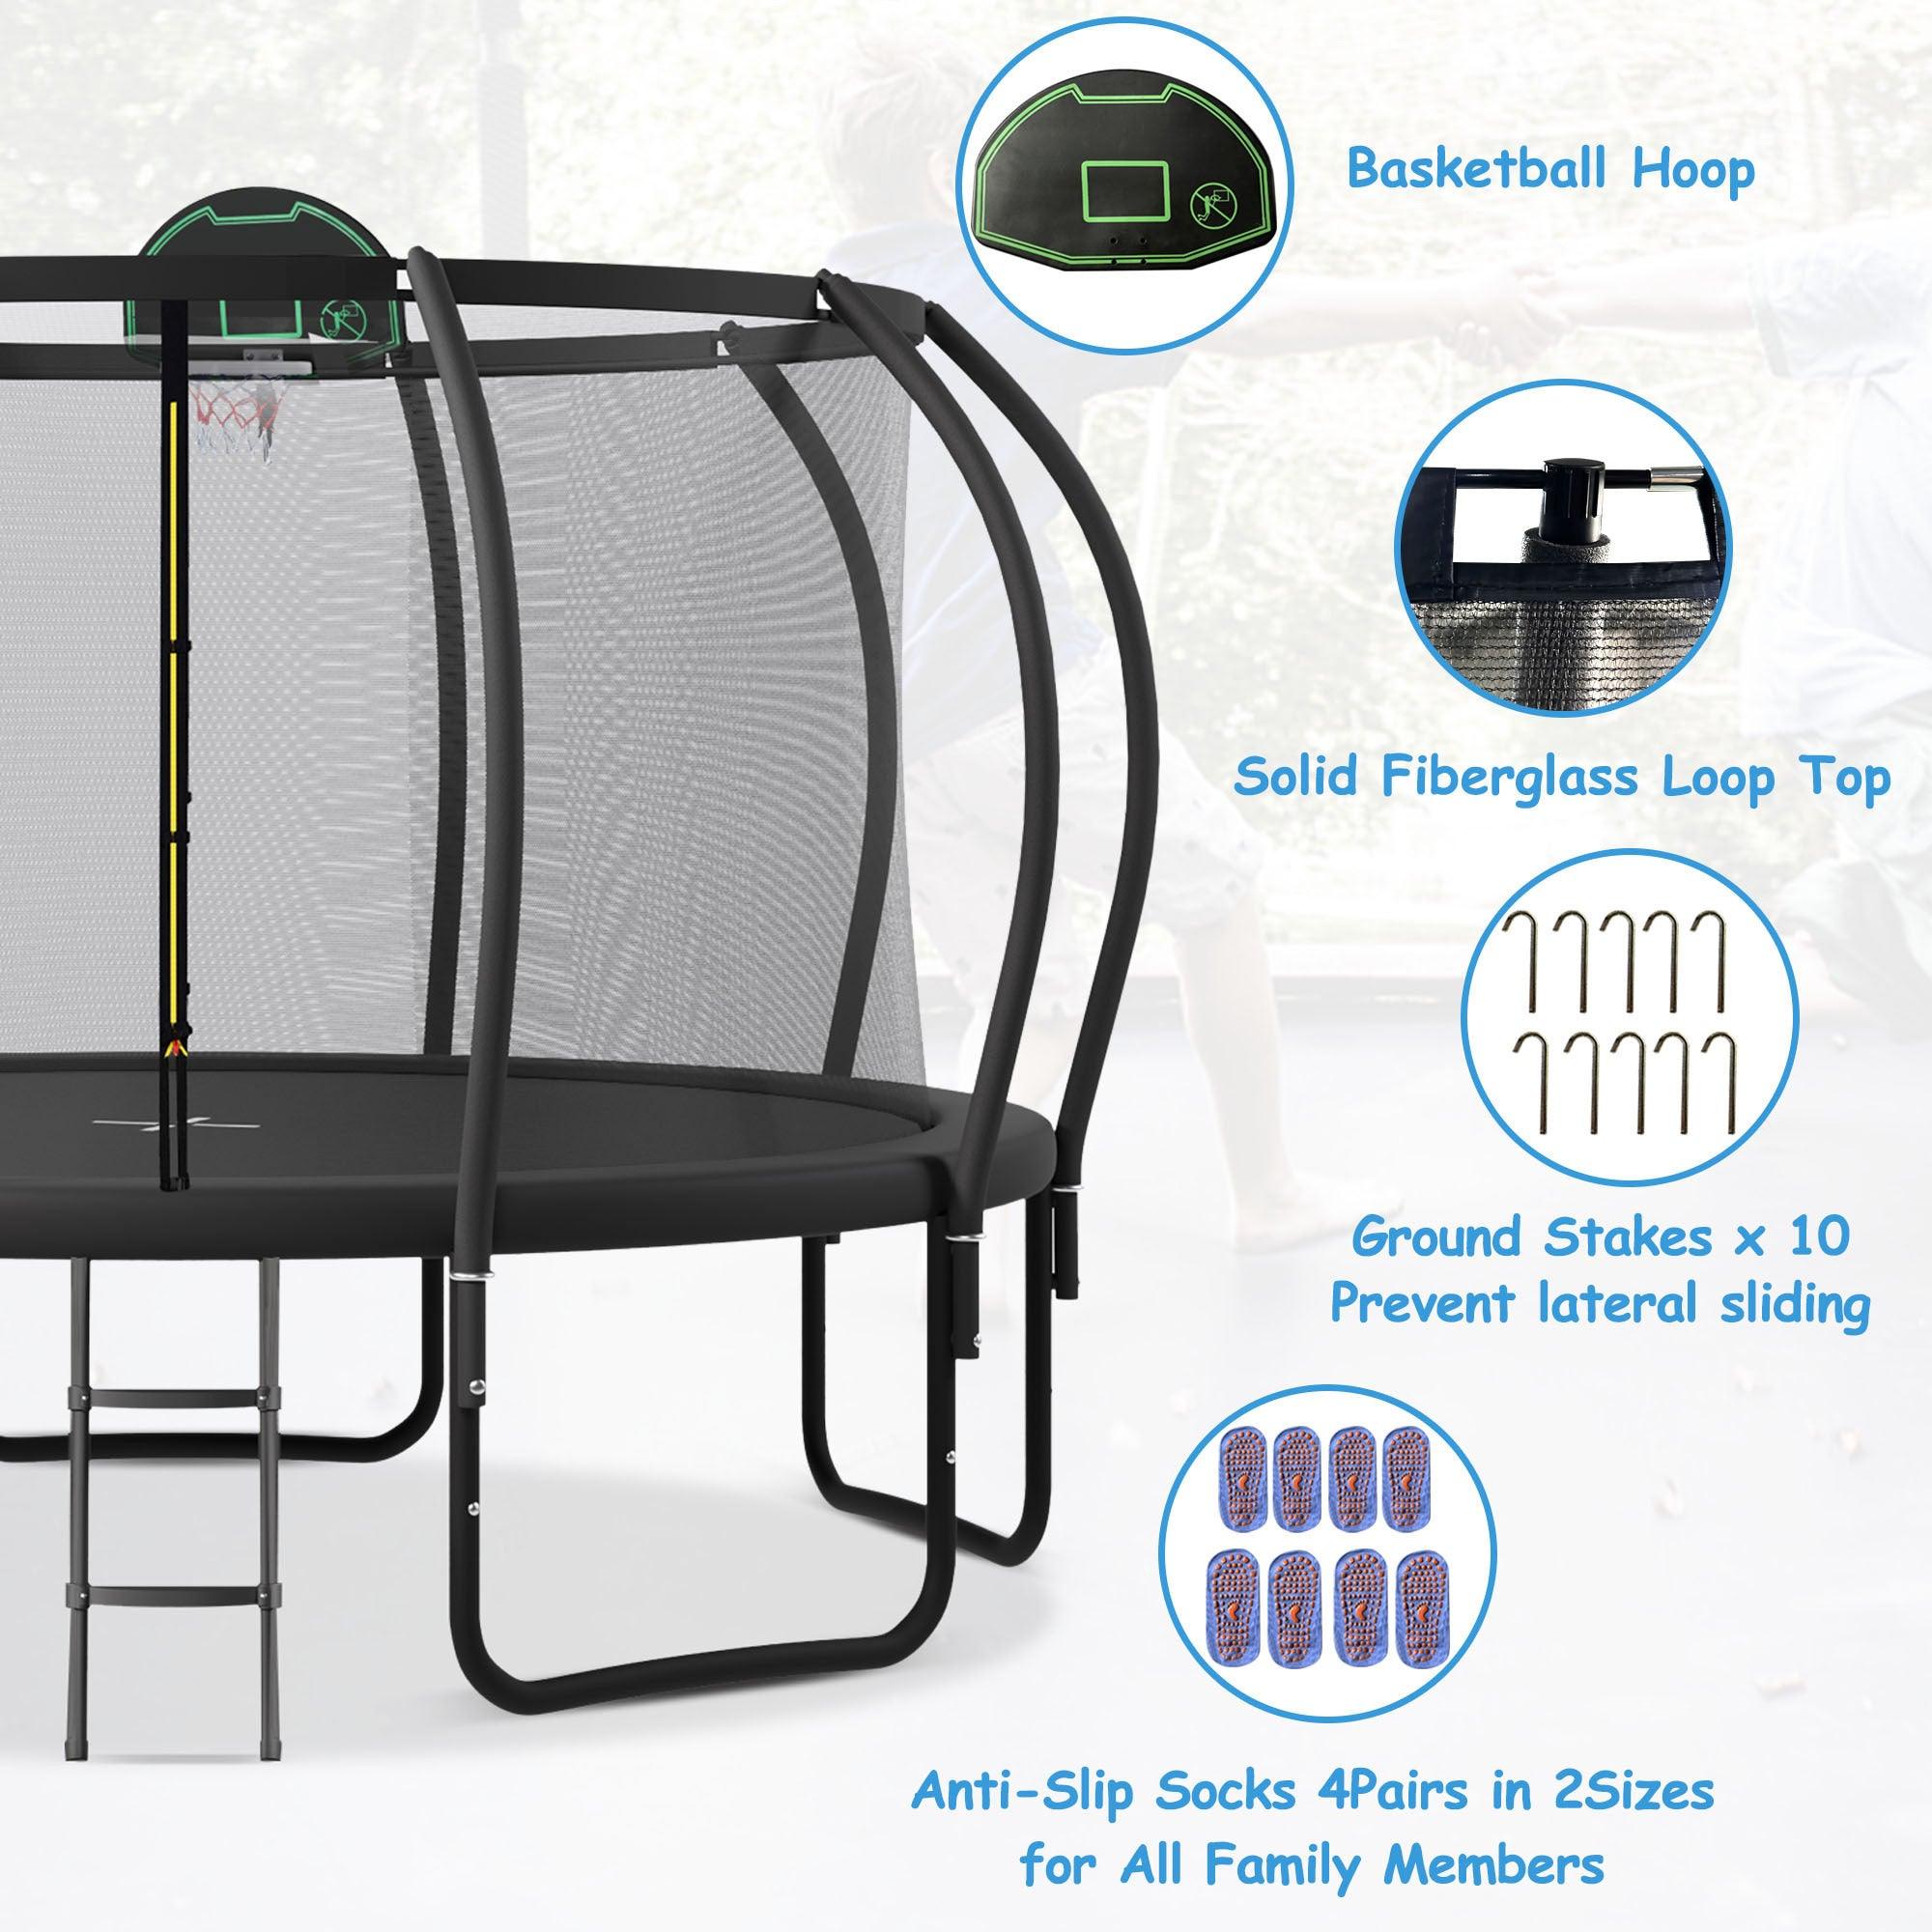 🆓🚛 12FT Trampoline for Kids With Upgraded ArcPole and Composite TopLoop for Safety Enclosure + Basketball Board and 10 Ground Stakes